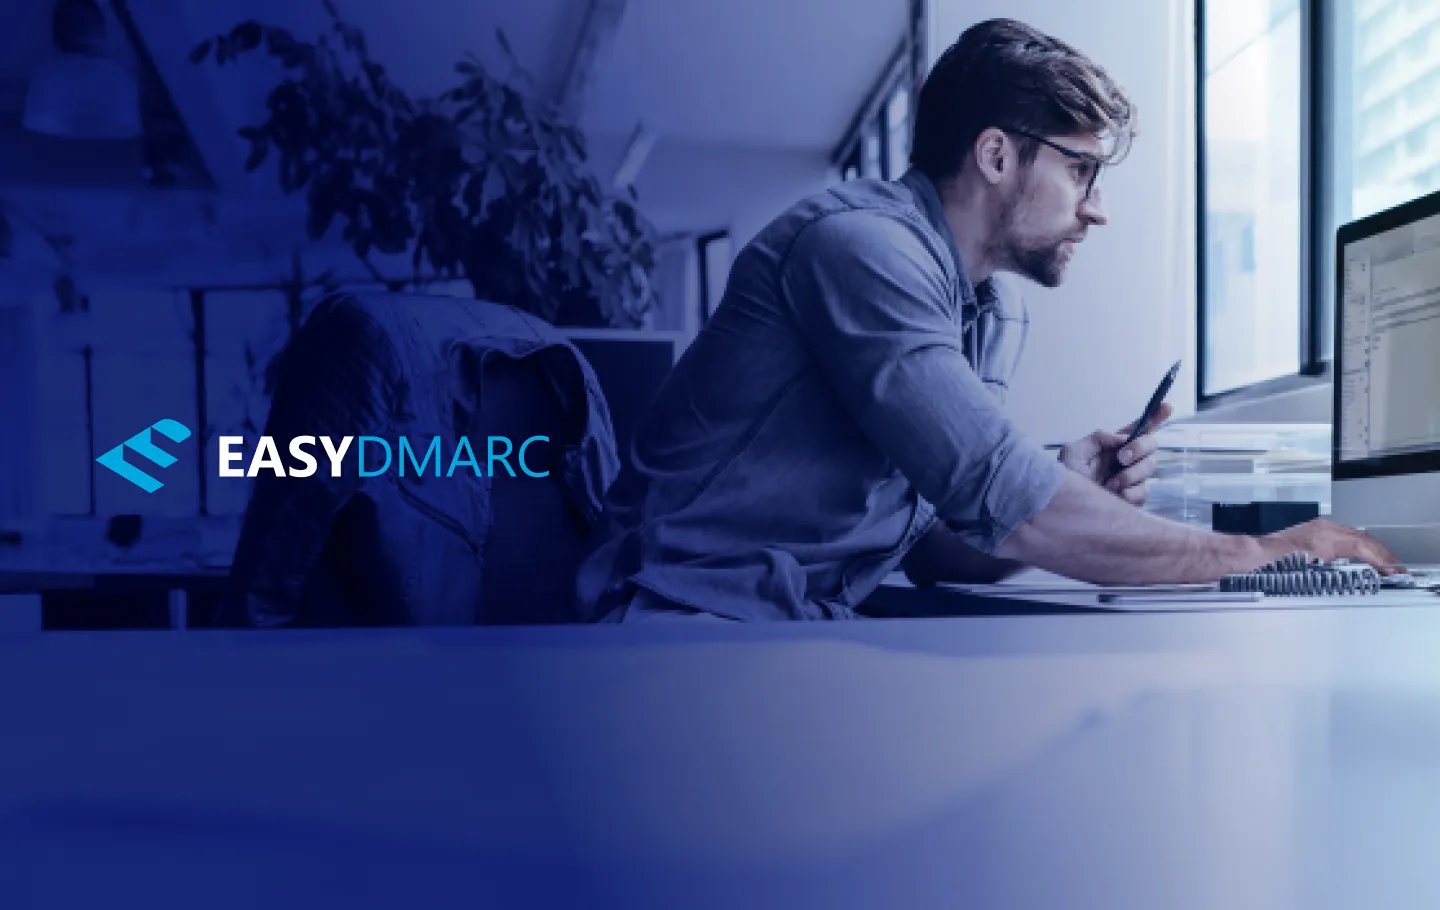 A person working on a computer, EasyDMARC logo on the left side